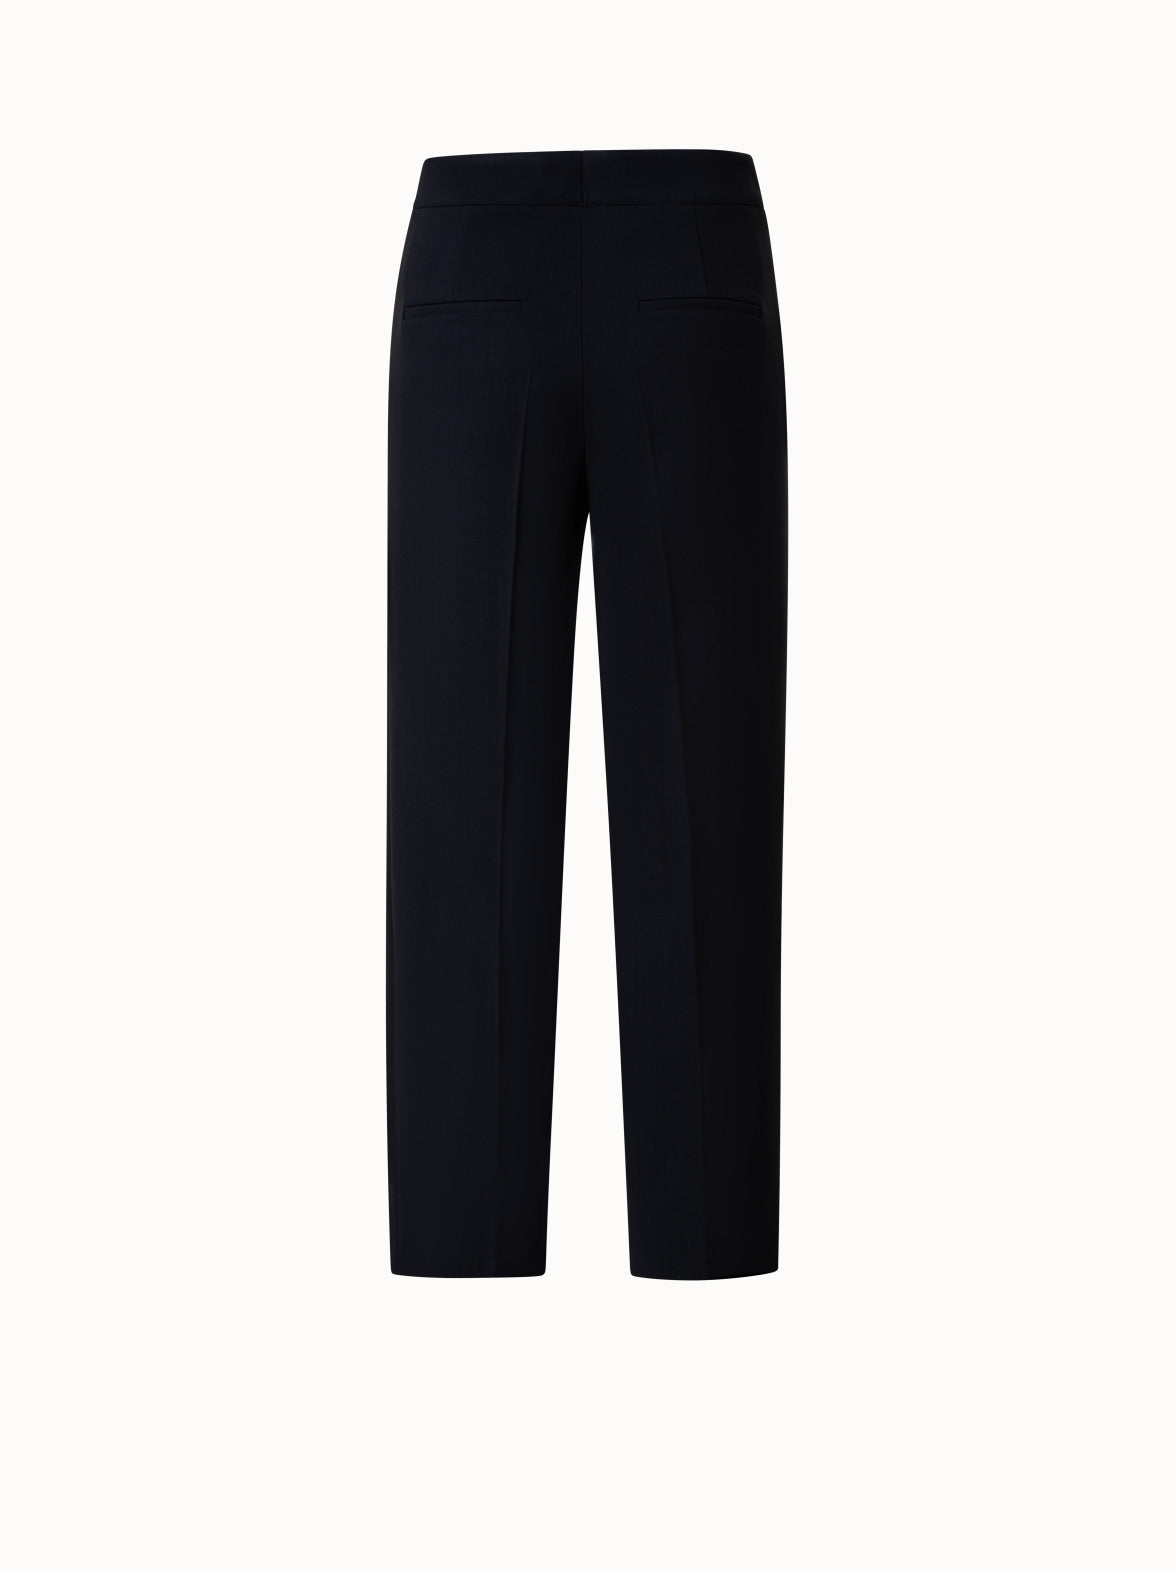 Black Knitted Cropped Drop Crotch Pants Made of Wool